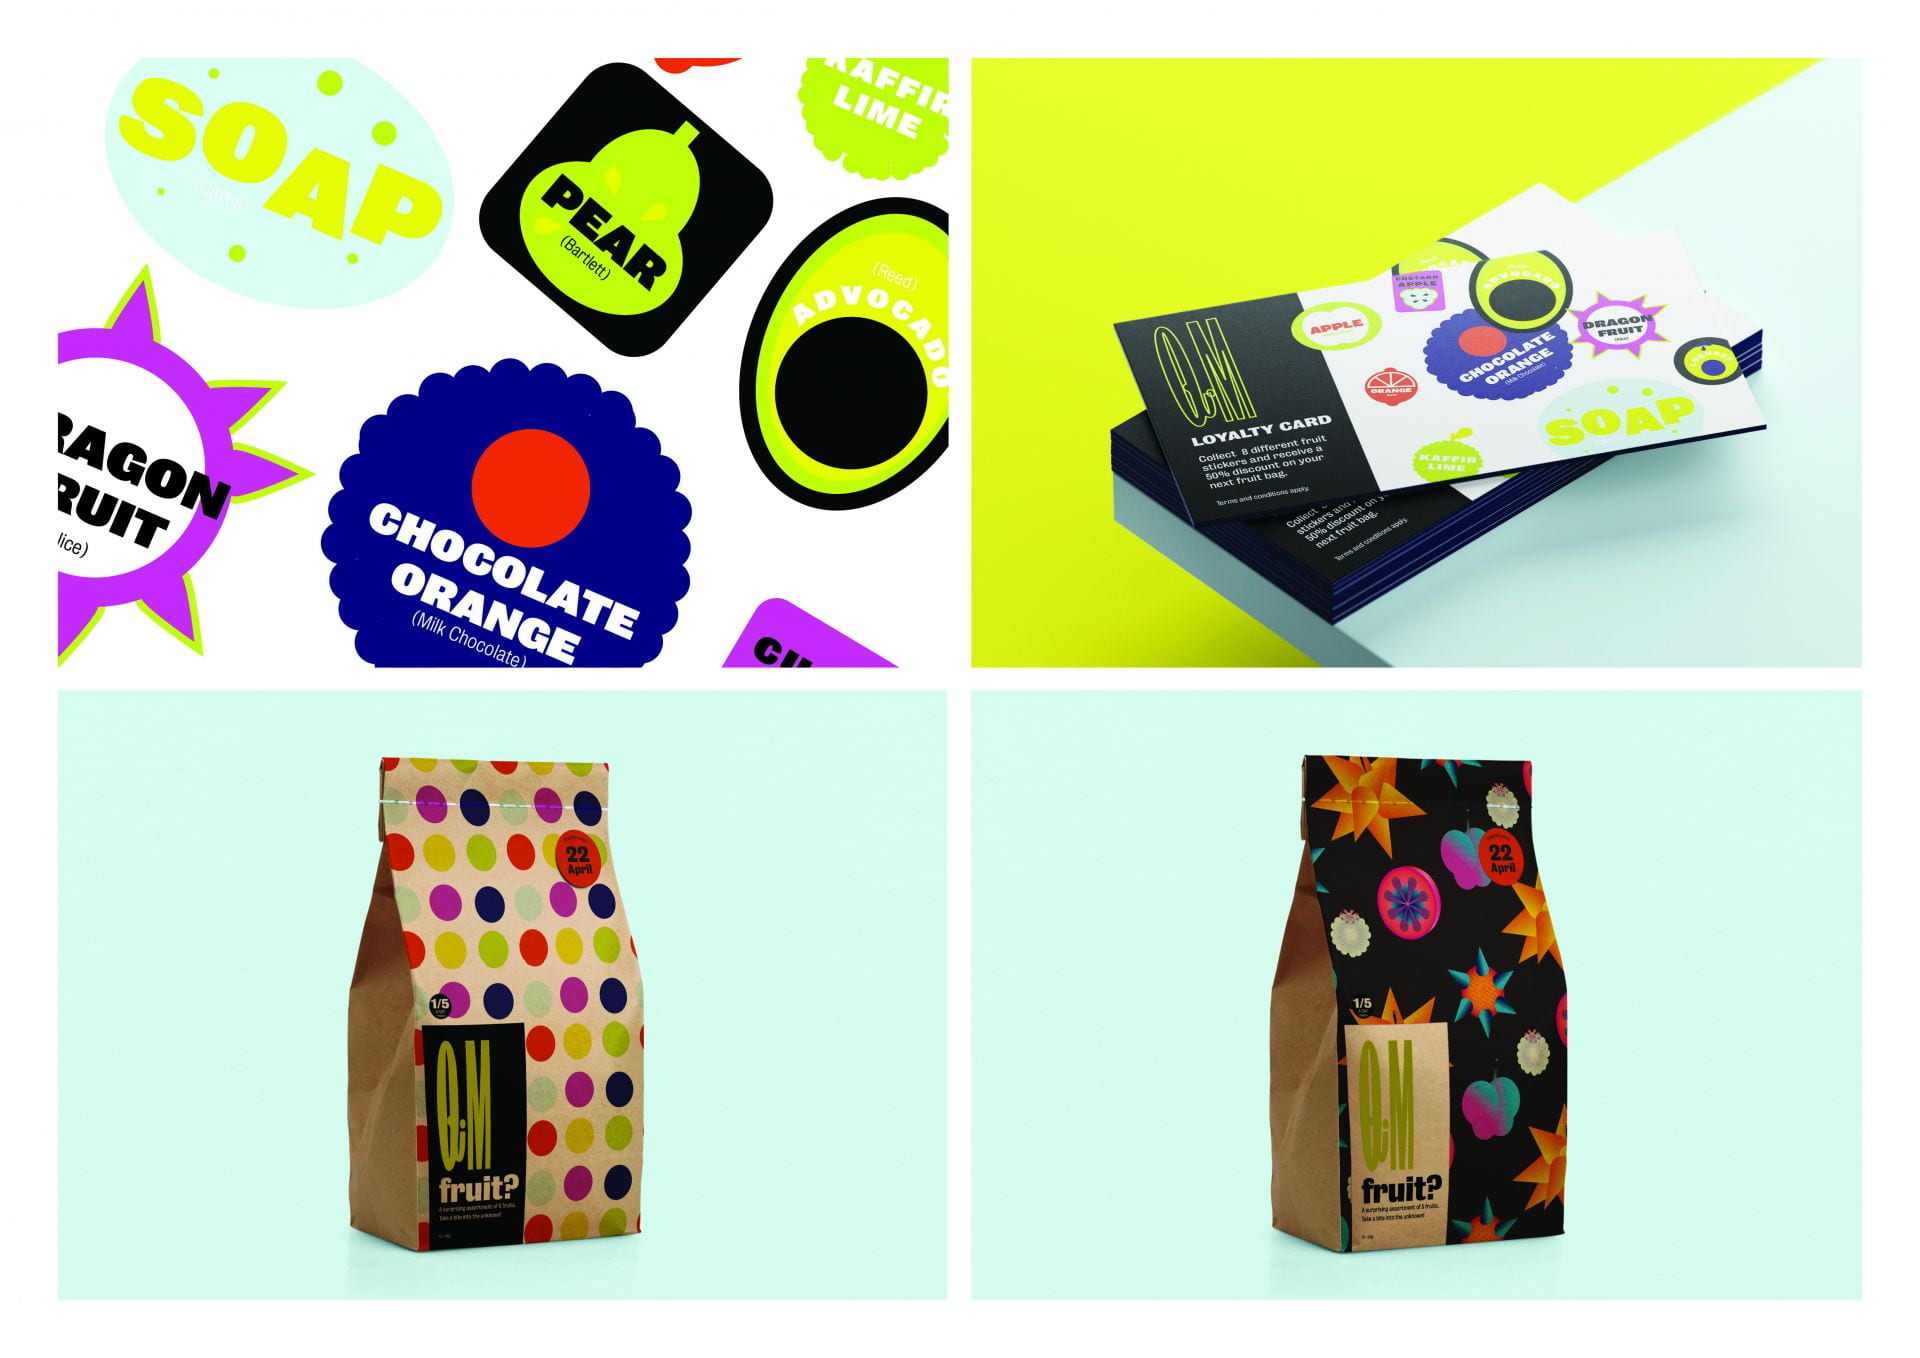 Loyalty cards and bags of fruit, brightly coloured and patterned.